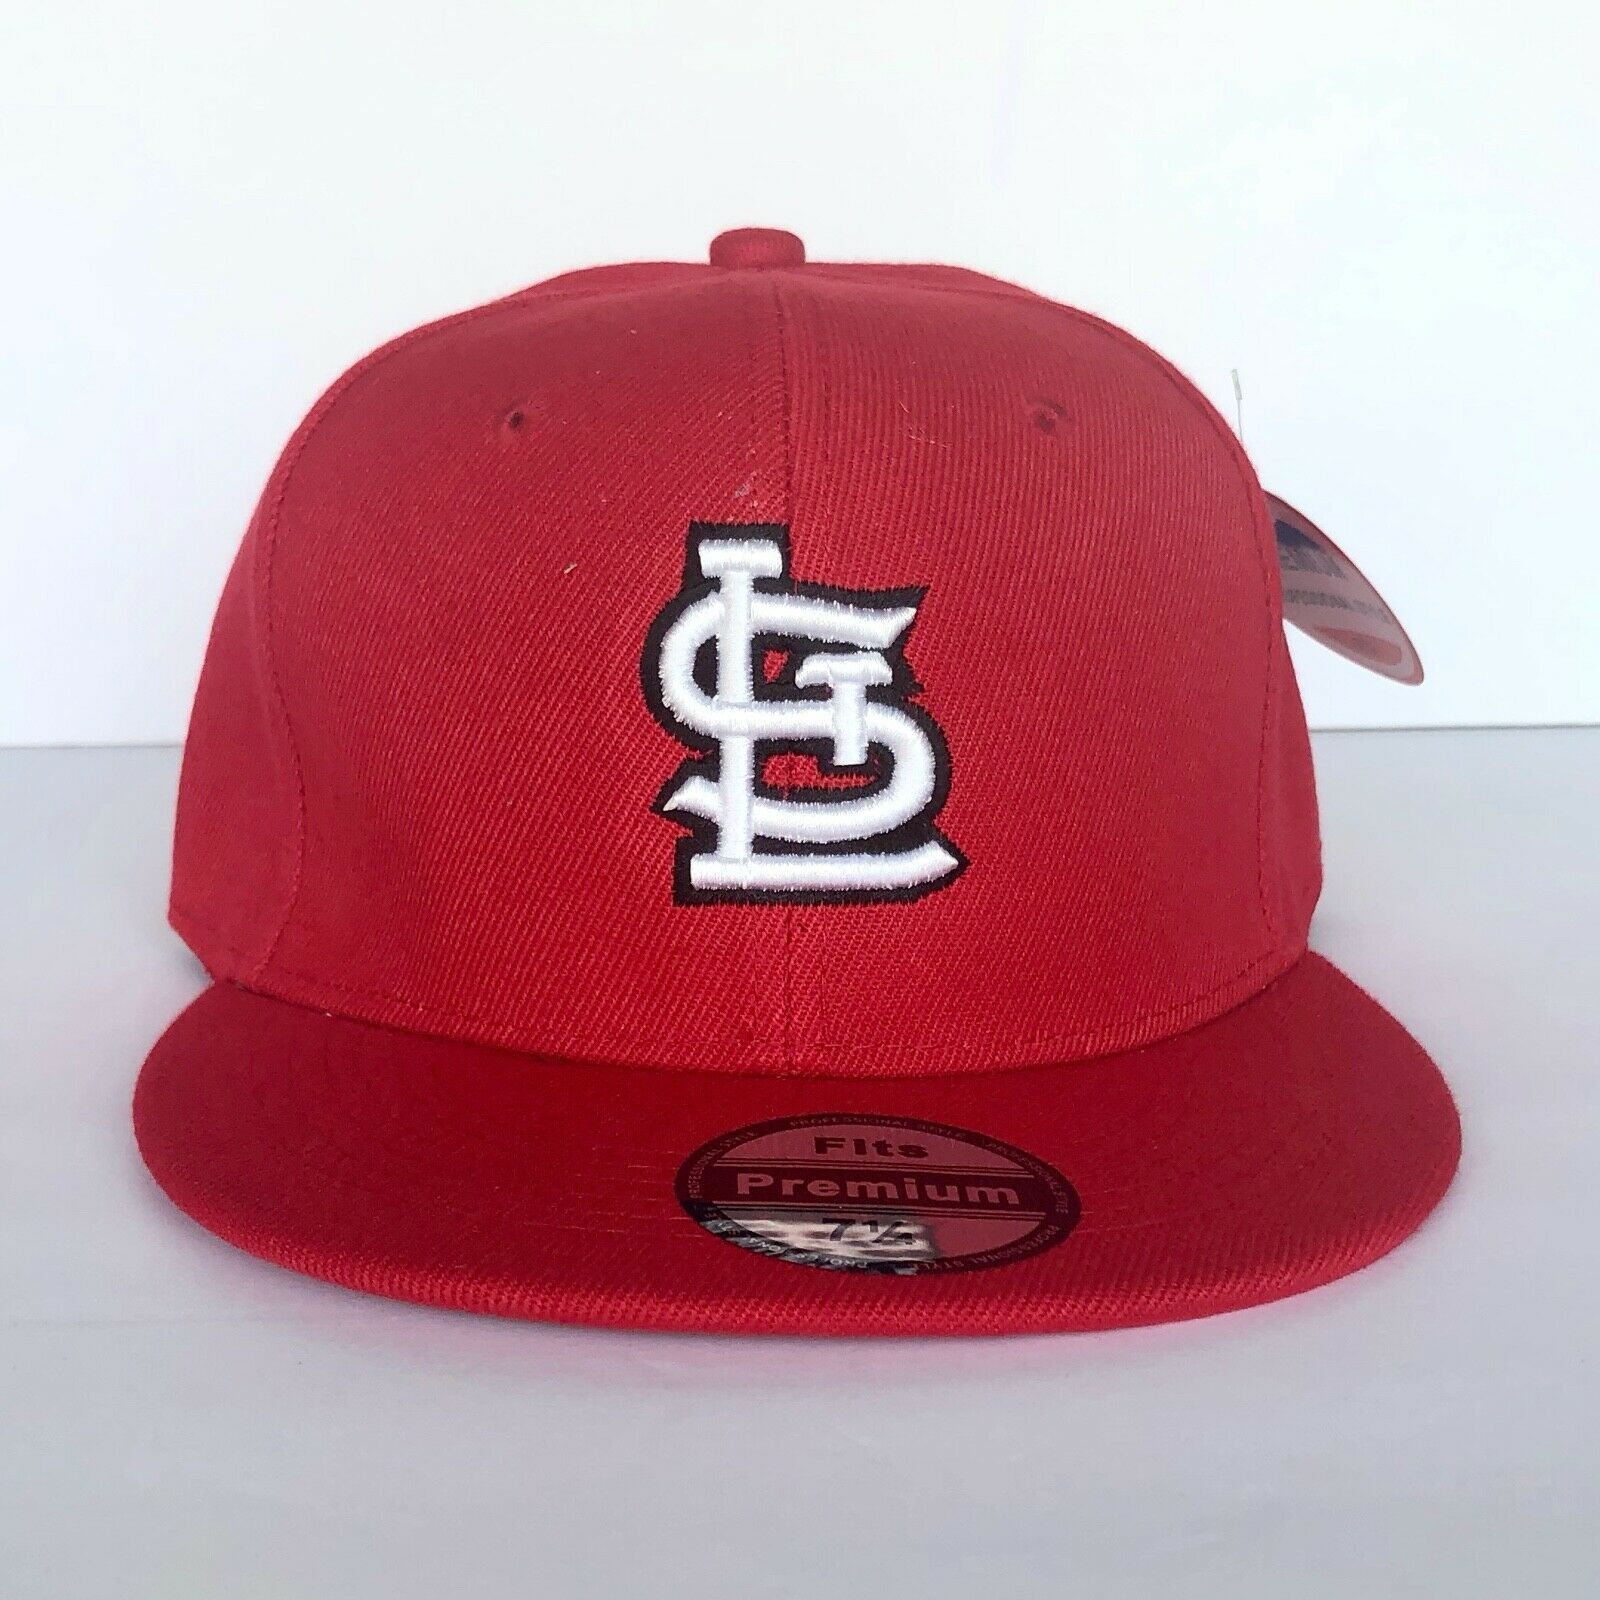 NEW Mens Saint St. Louis Cardinals Baseball Cap Fitted Hat Multi Size Red